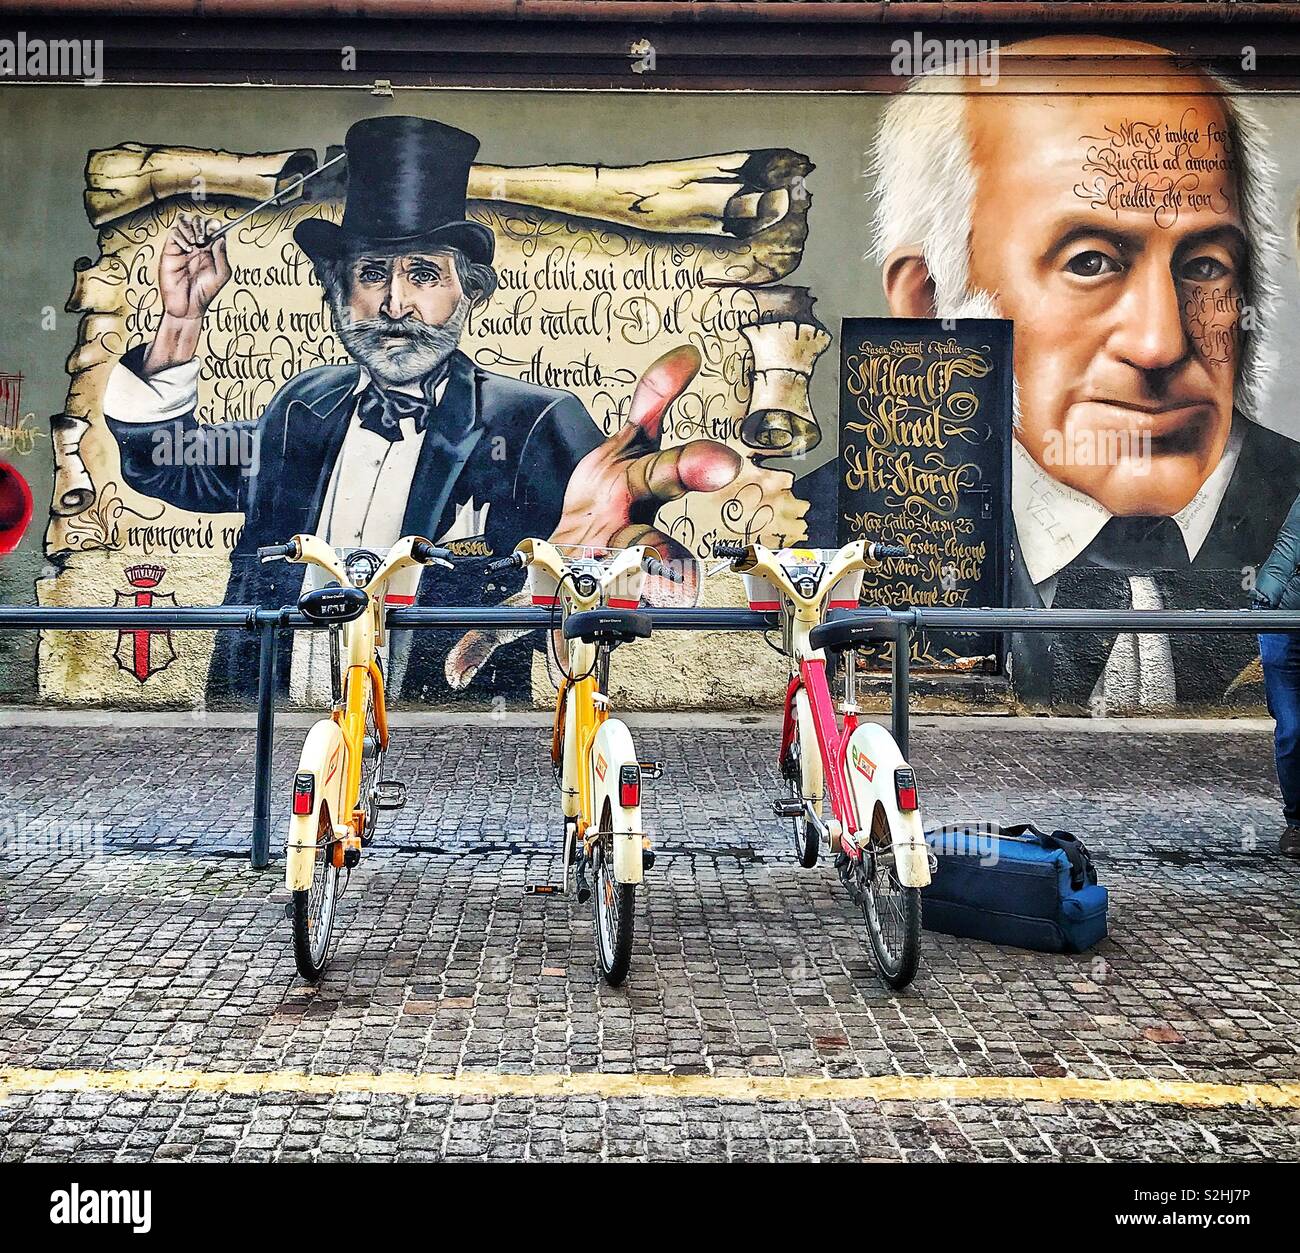 Three bicycles parked in a cycle rack on the cobbled sidewalk in front of mural art on side of a building in Milan, Italy. A bag is on the sidewalk next to one of the bikes, belonging to a young man Stock Photo